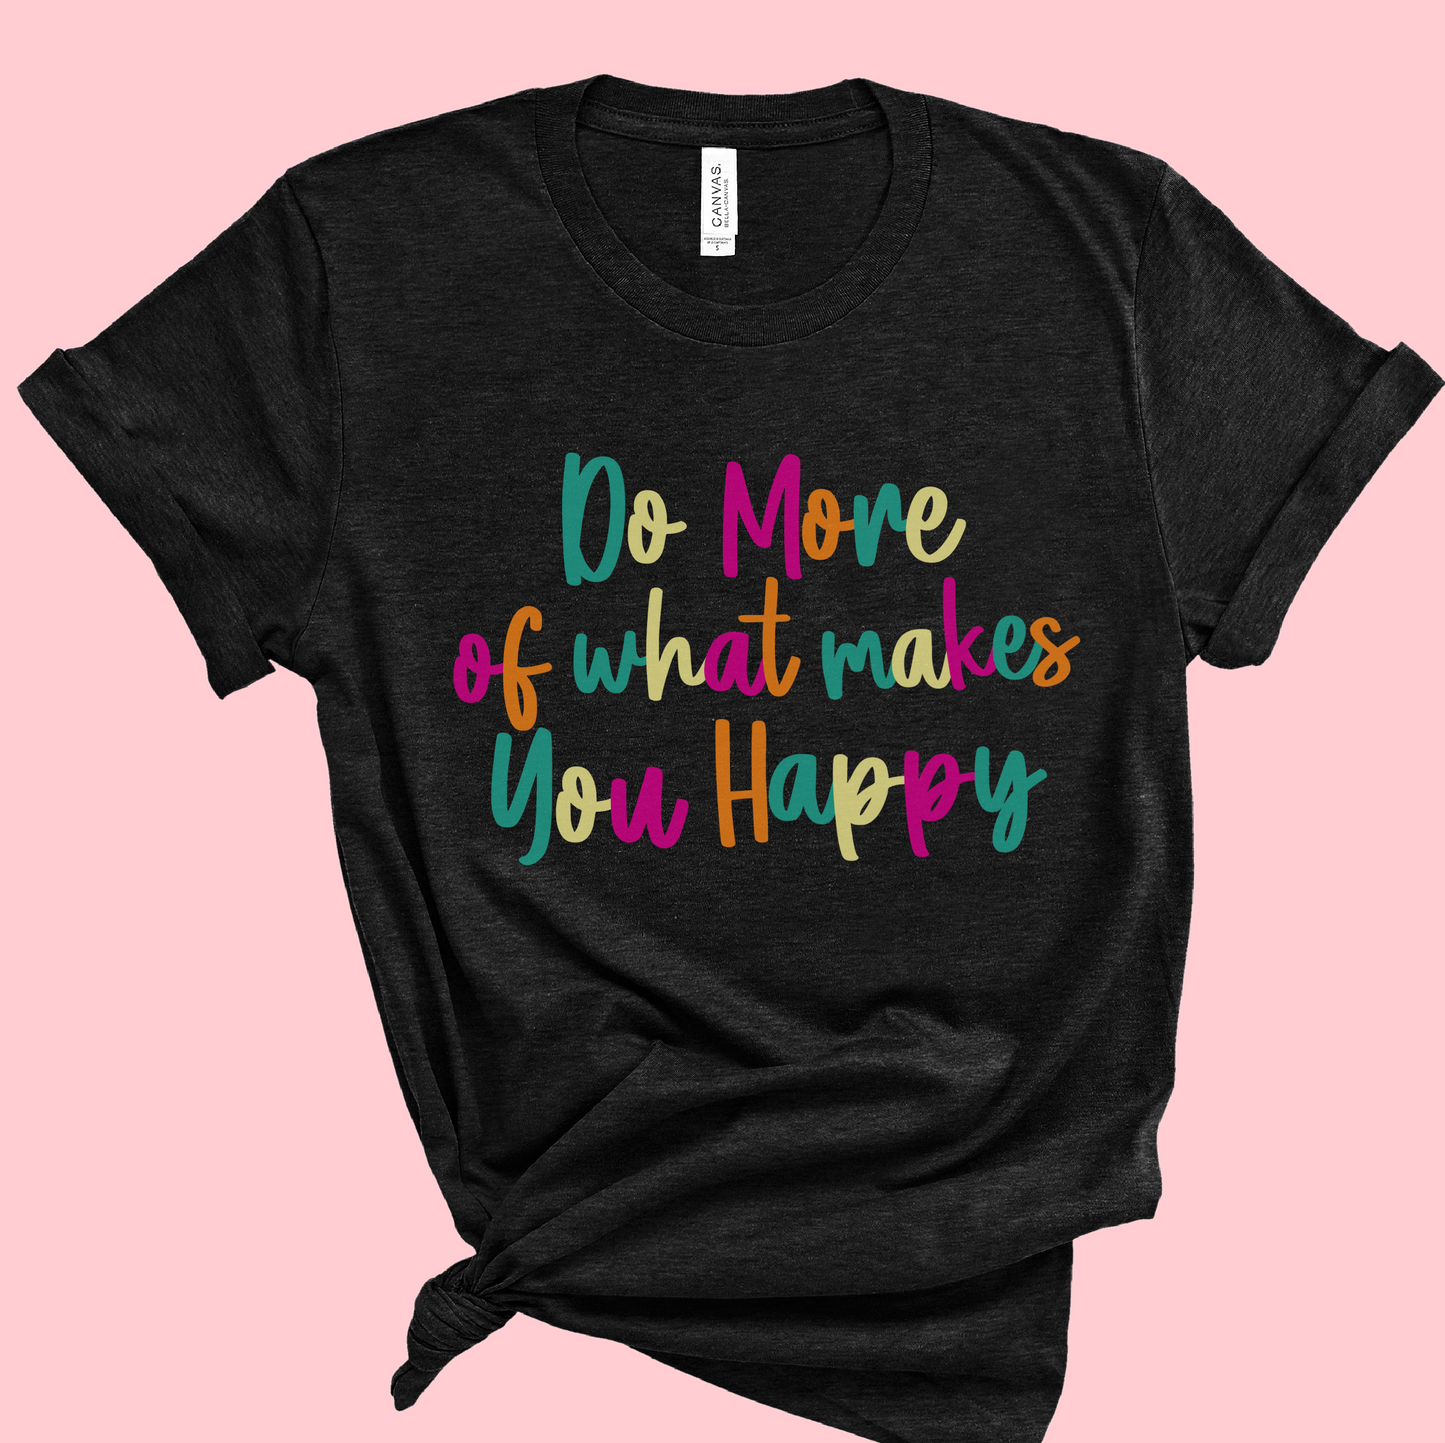 Soft Style Do More Of What Makes You Happy Tee/ Toddler, Youth, and Adult Sizes Available